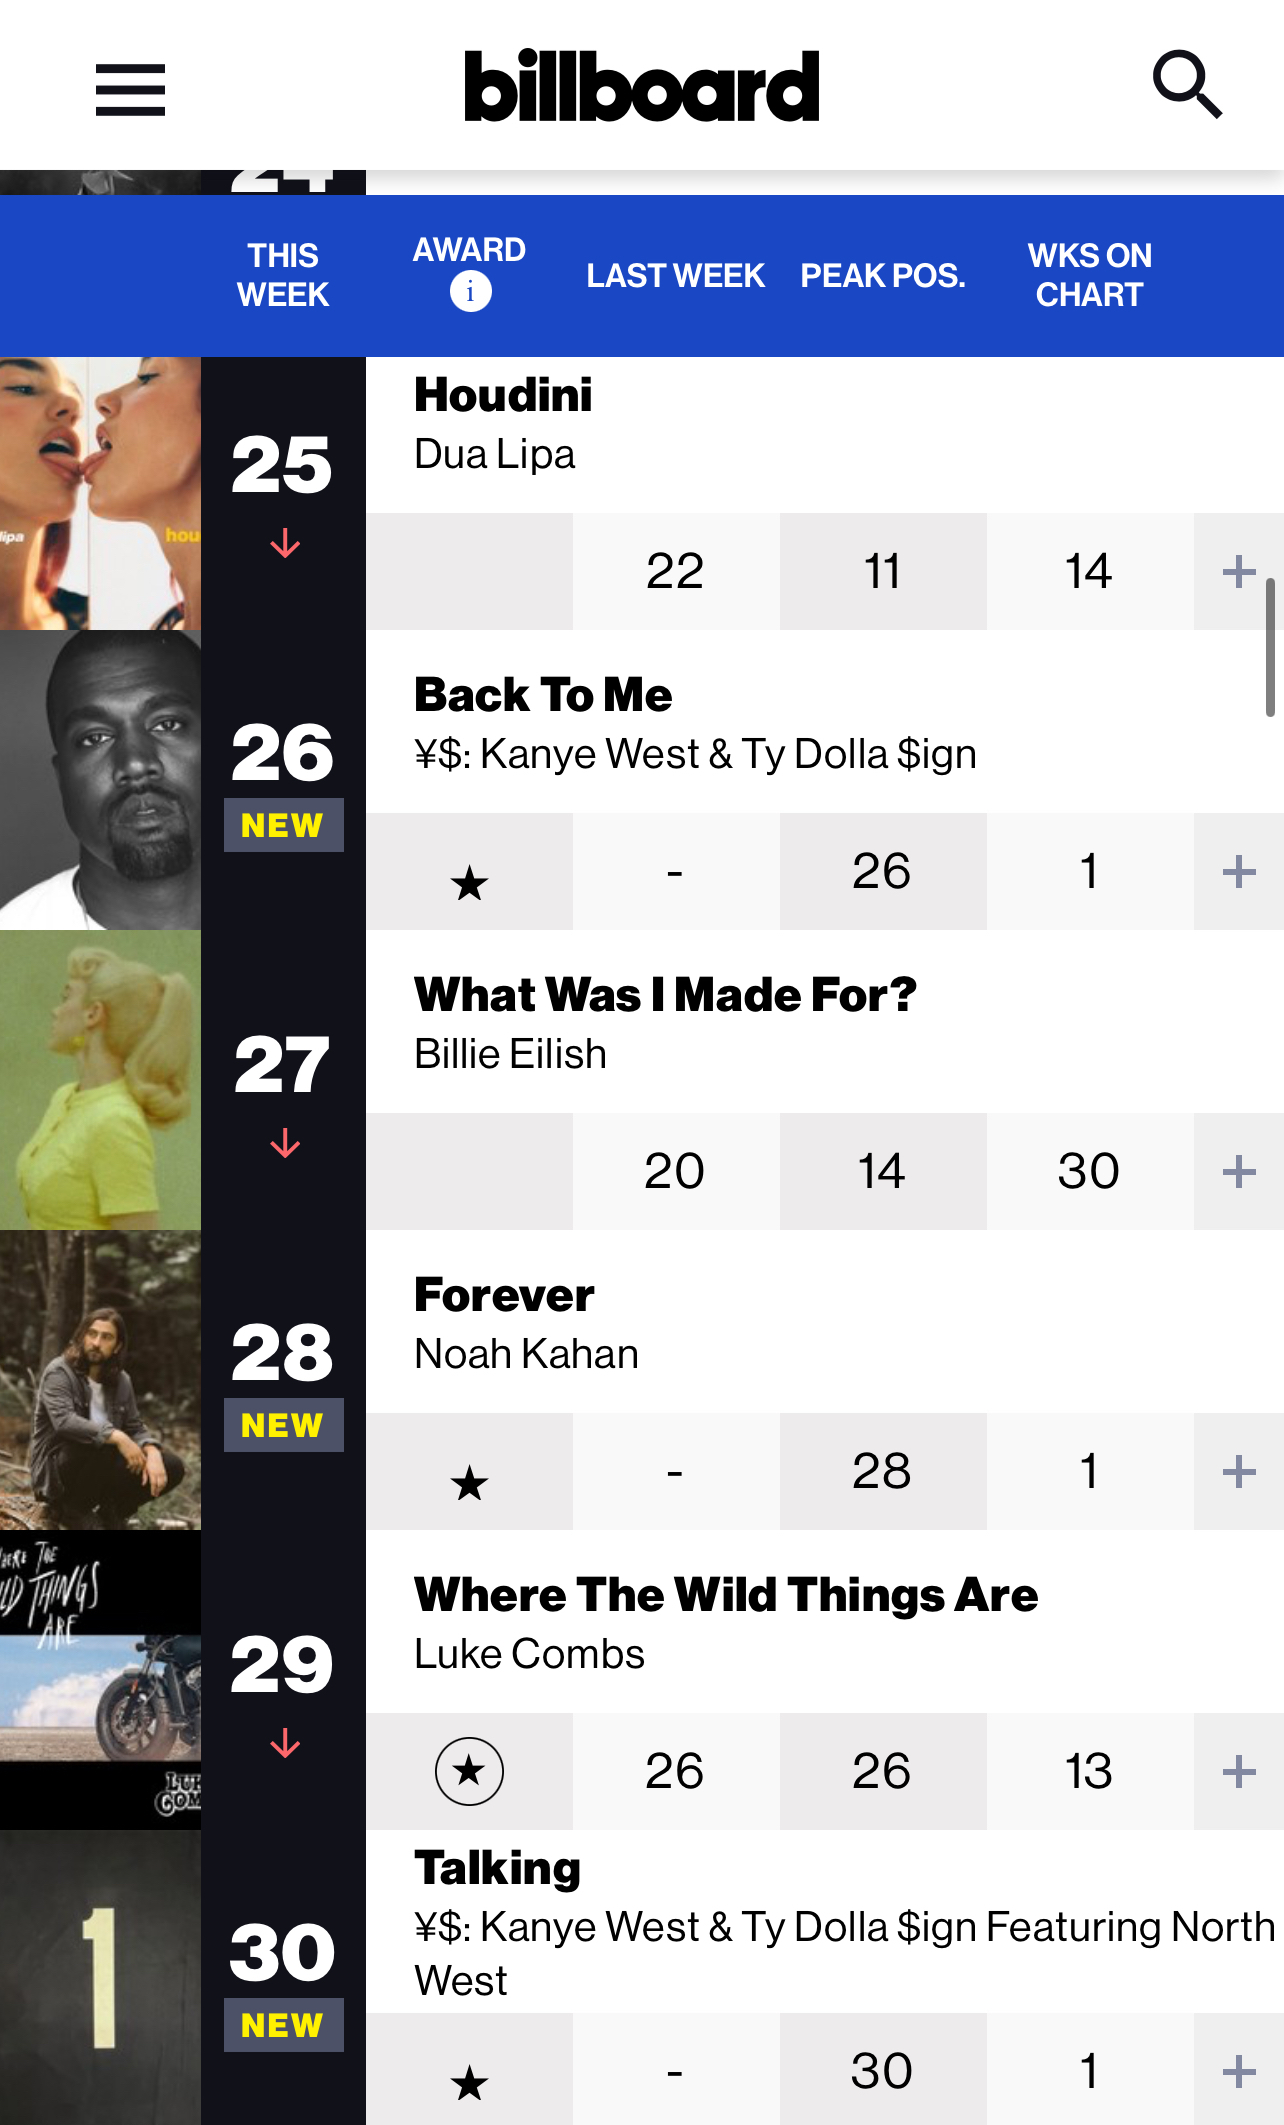 Chart showing song rankings with artist names like Dua Lipa, Kanye West &amp;amp; Dolly Parton, and Billie Eilish with track titles